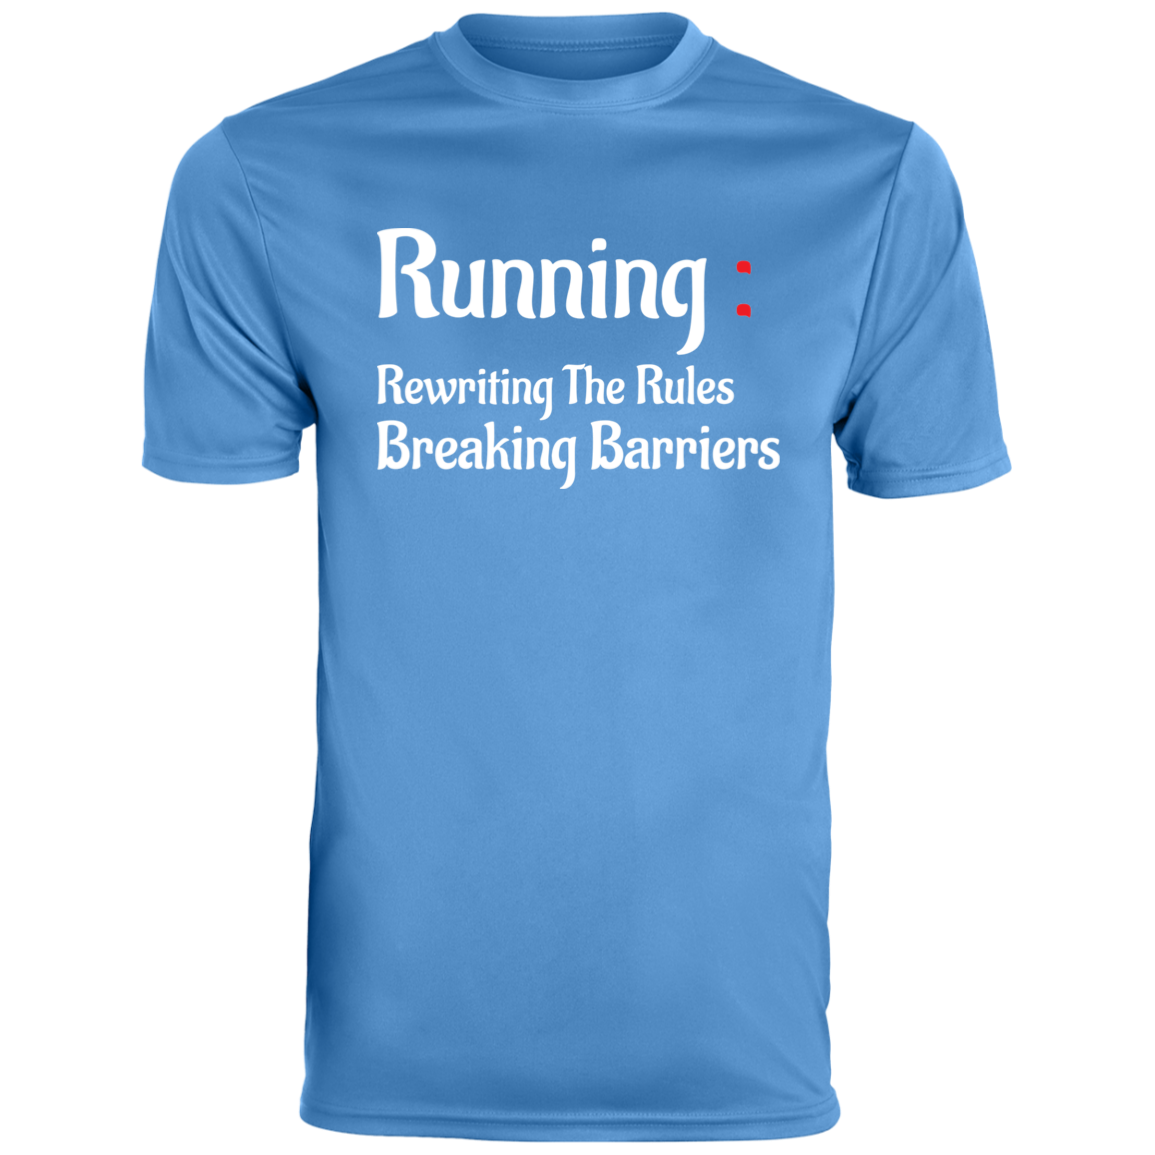 Men's Inspirational Top Running rewriting the rules, breaking barriers